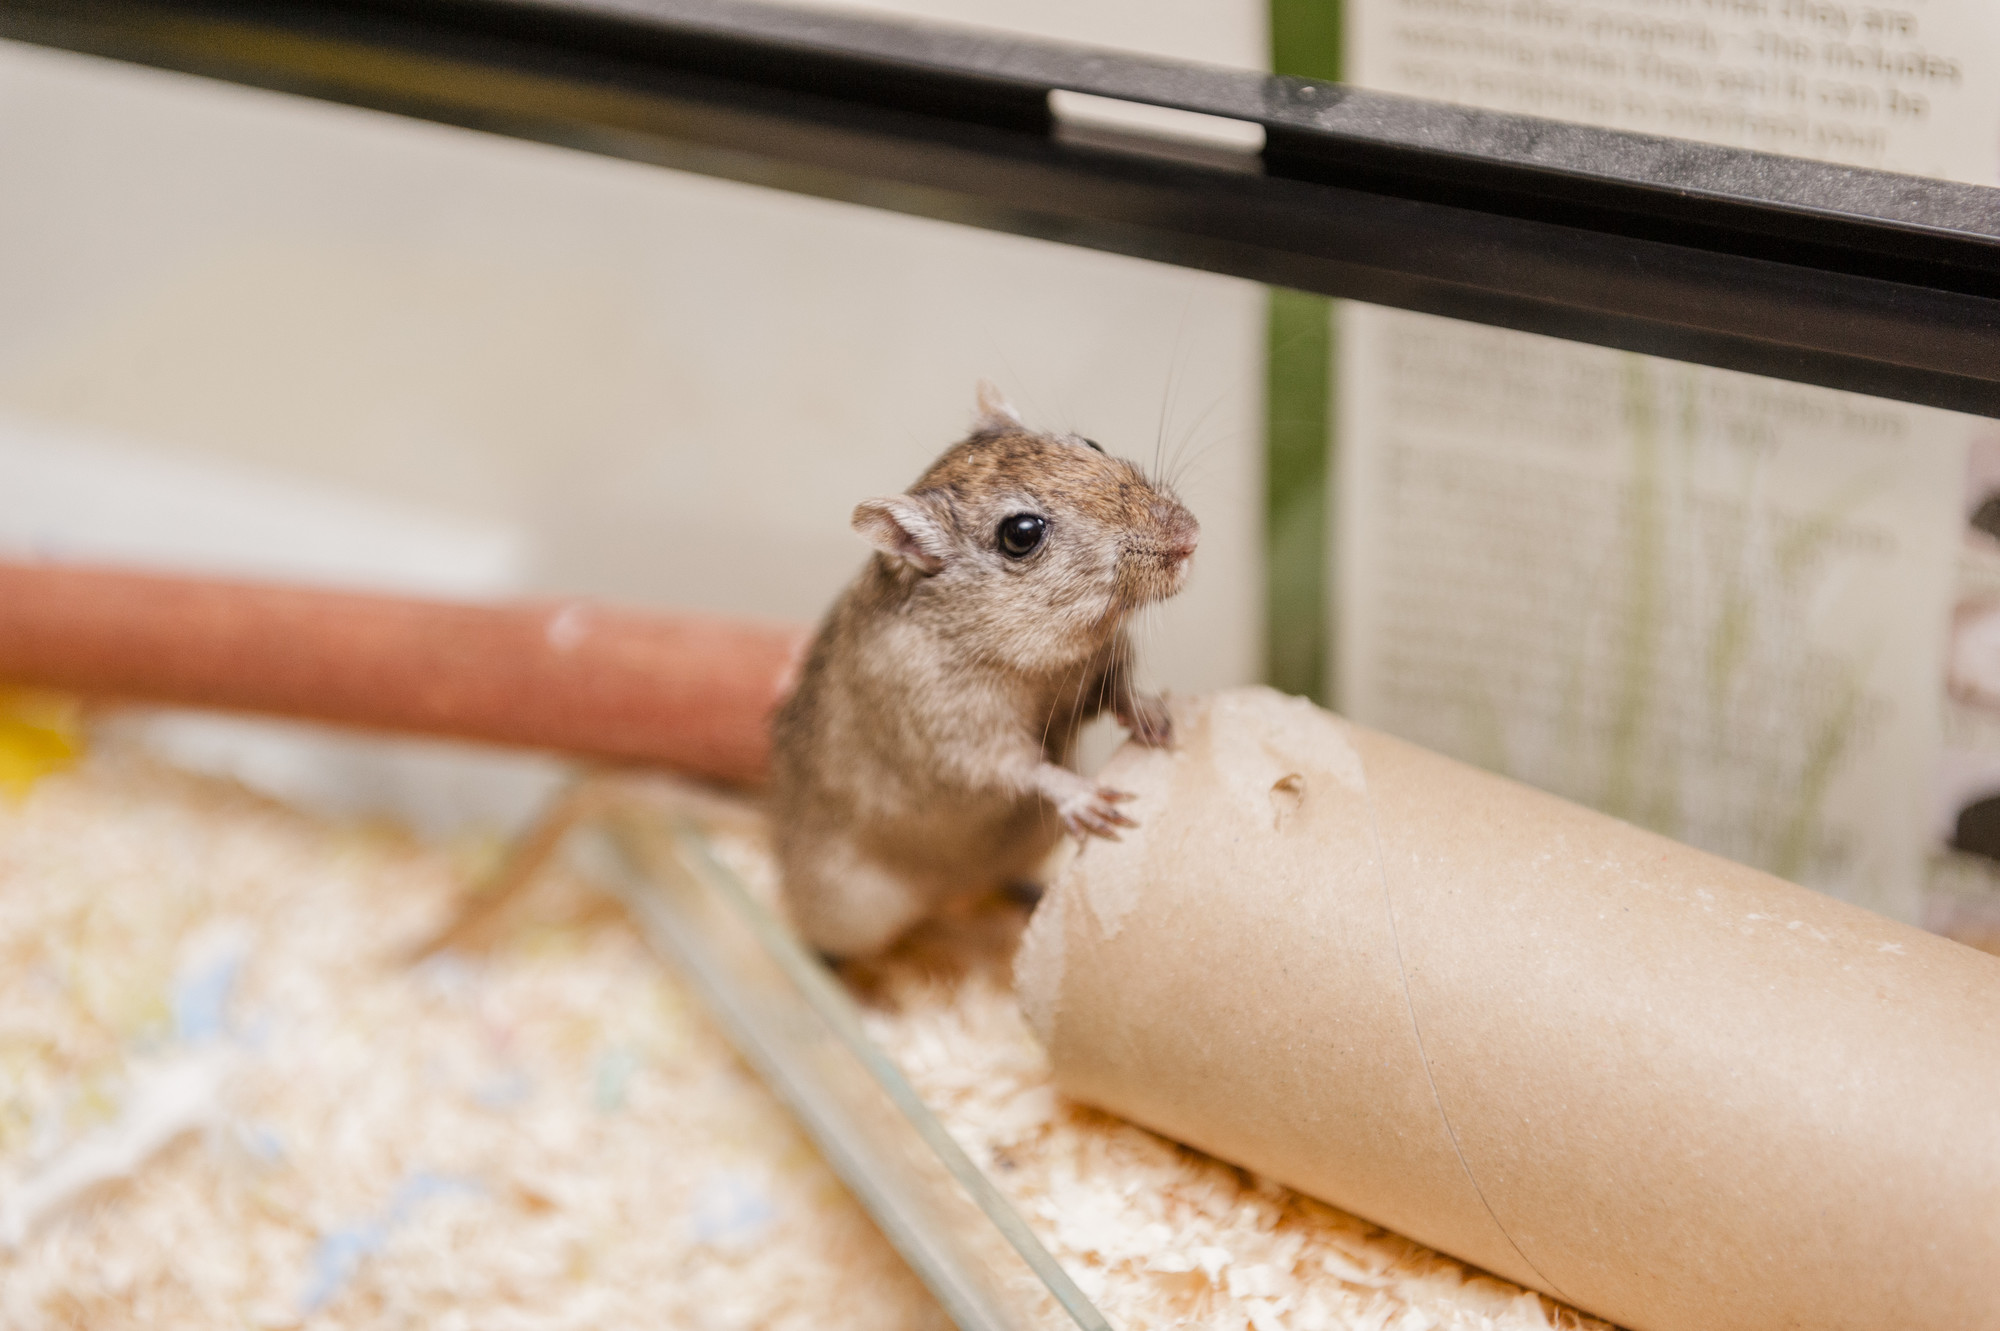 A brown gerbil standing in front of a cardboard tube